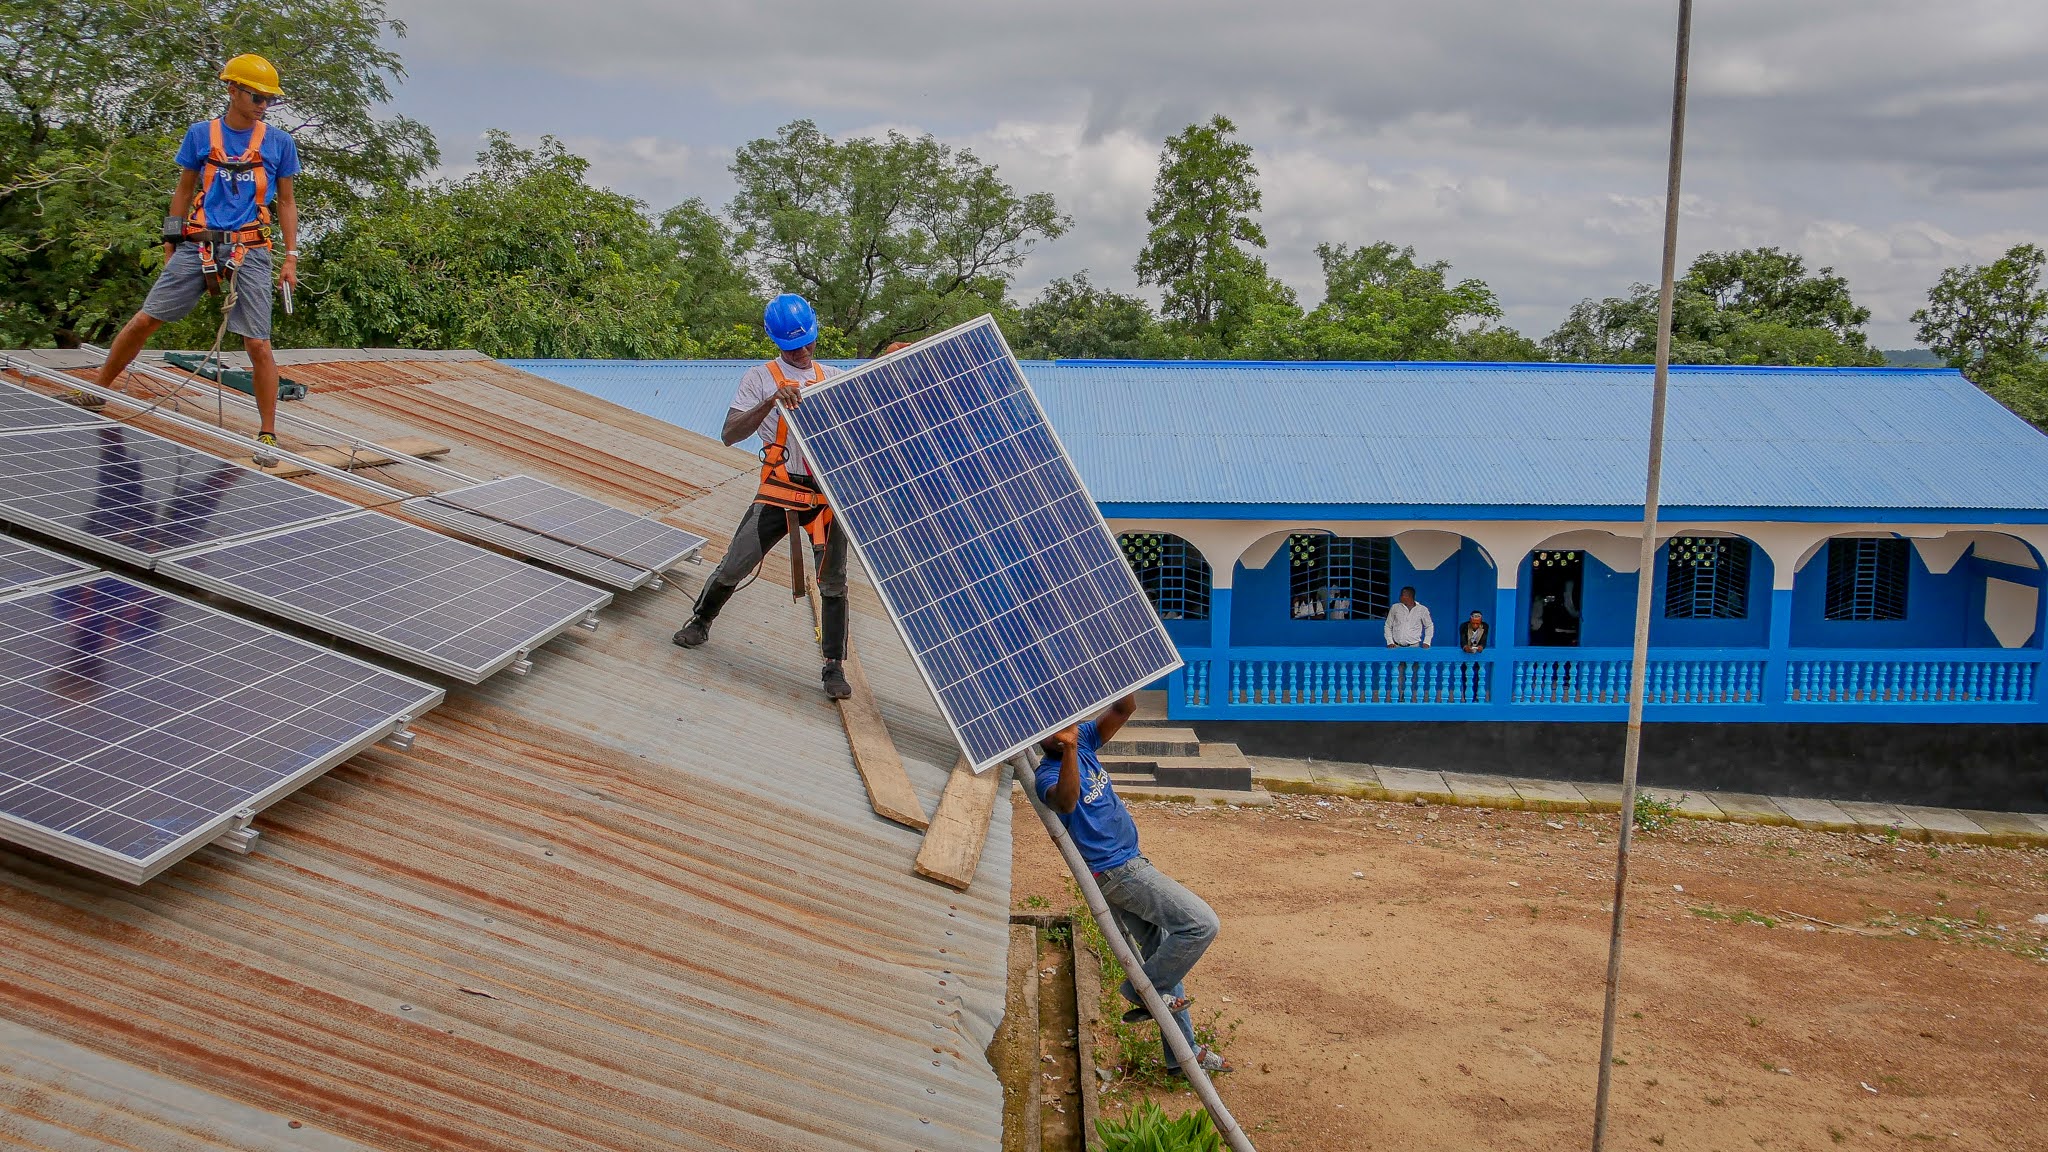 The SIMA Angaza Distributor Finance Fund was impressed by Easy Solar's electrification of over 100k Sierra Leonean households